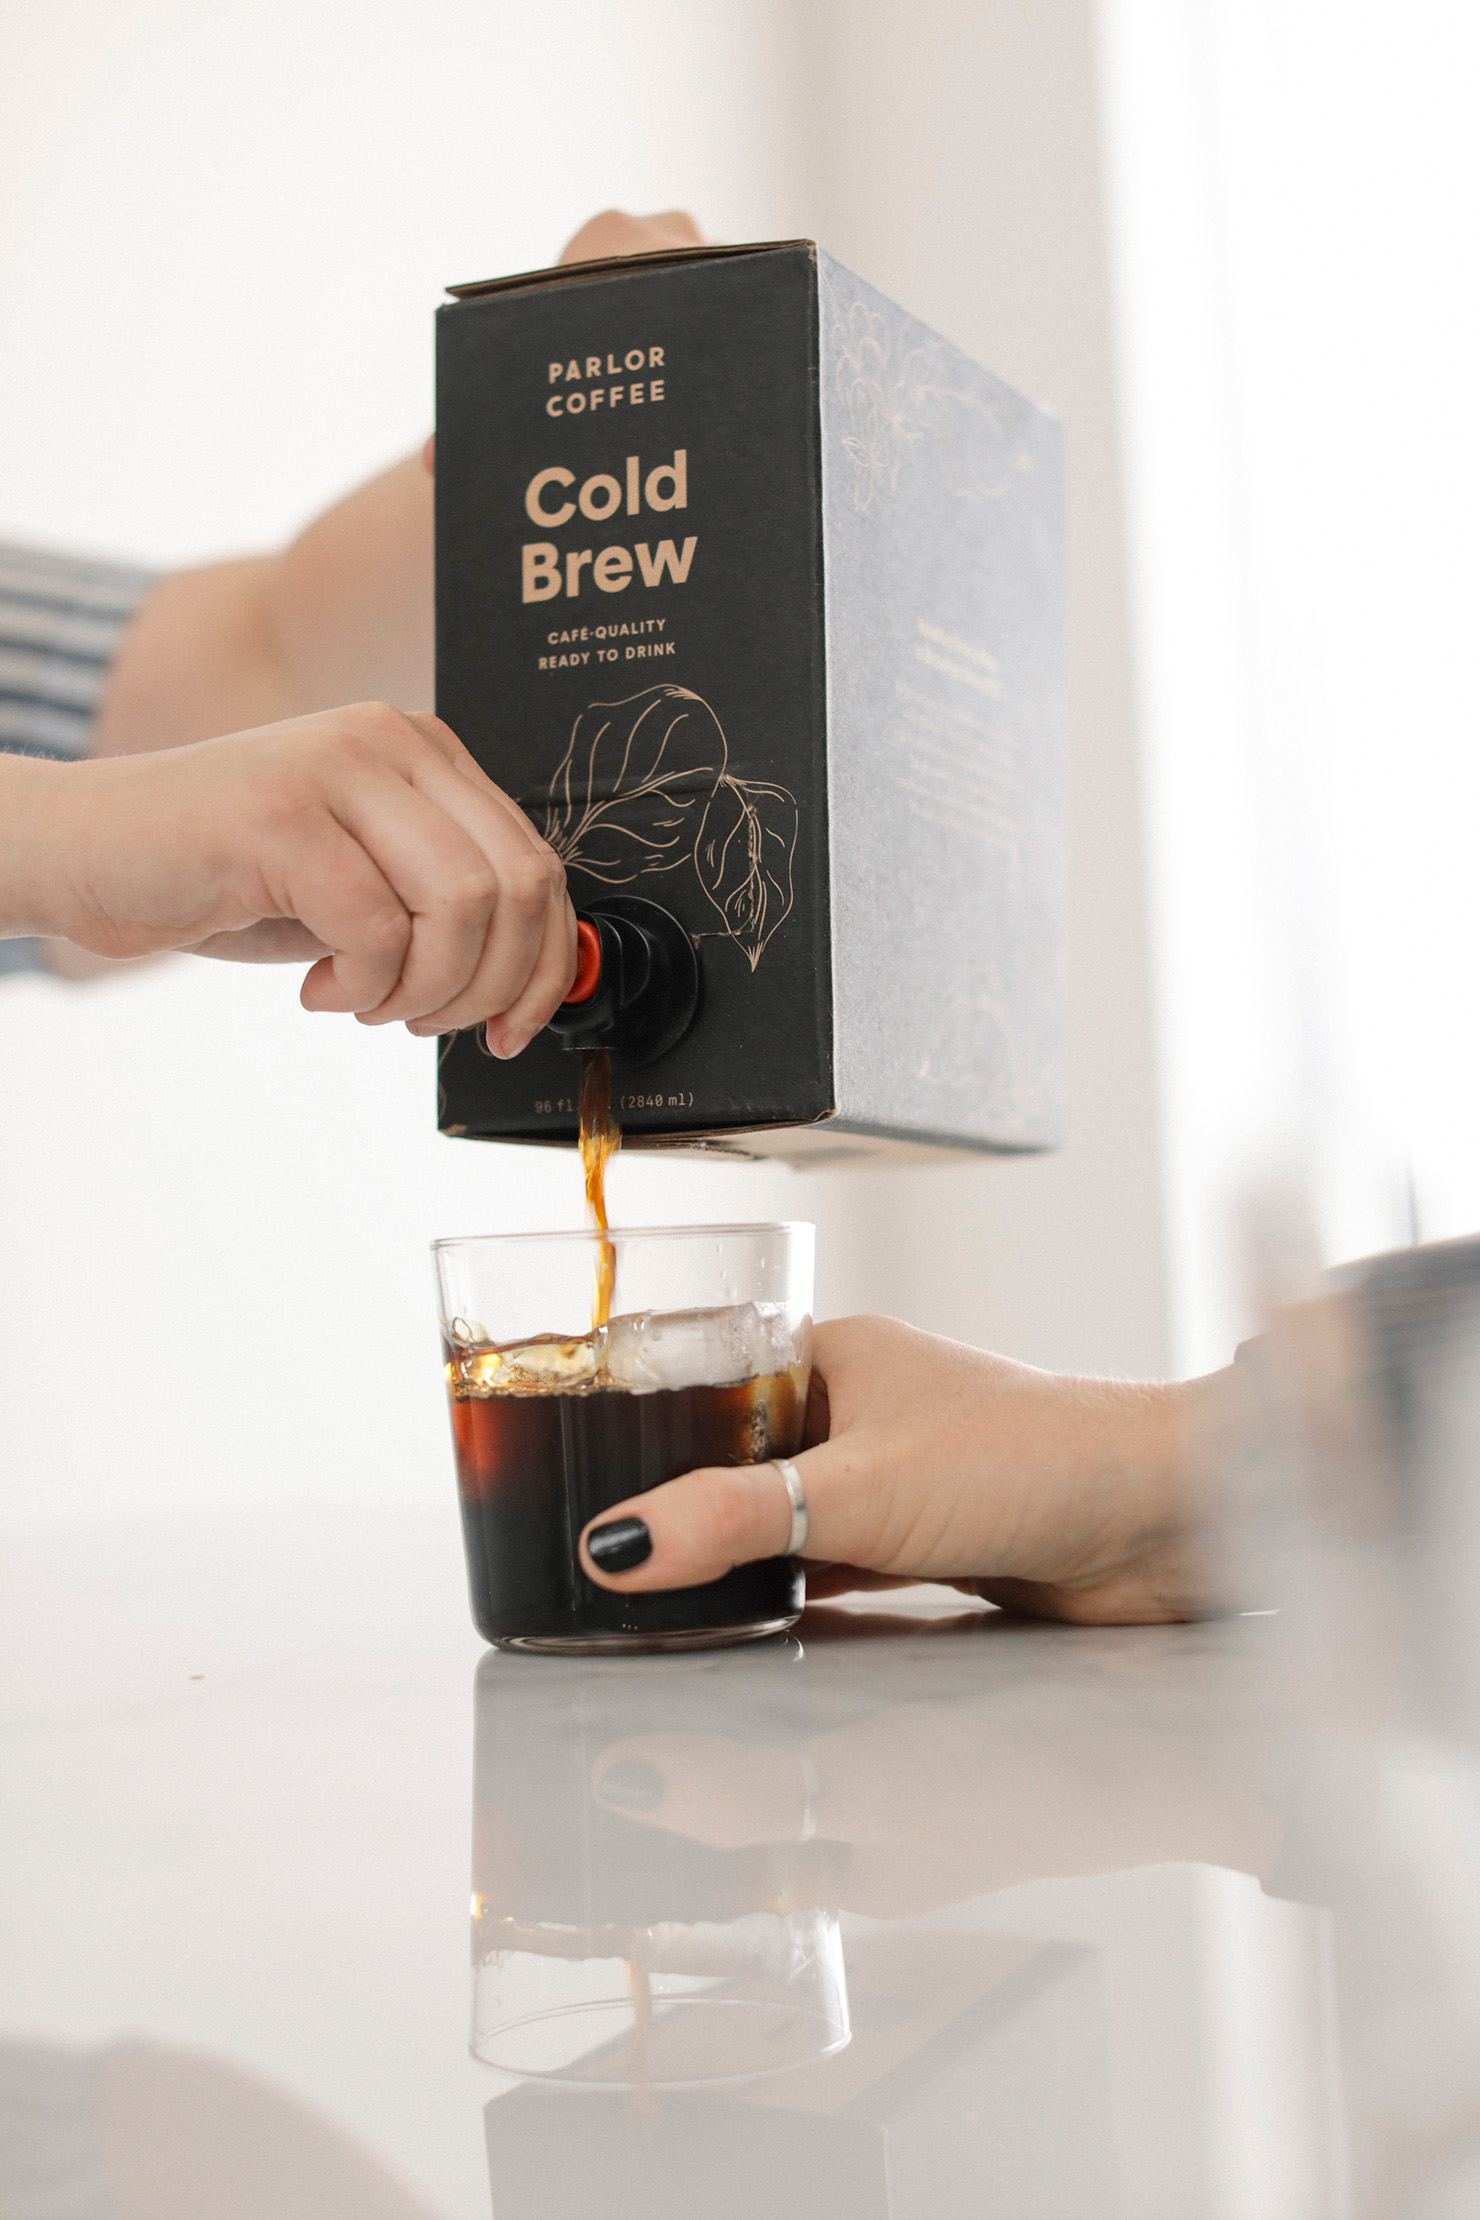 parlor coffee cold brew box sda submission